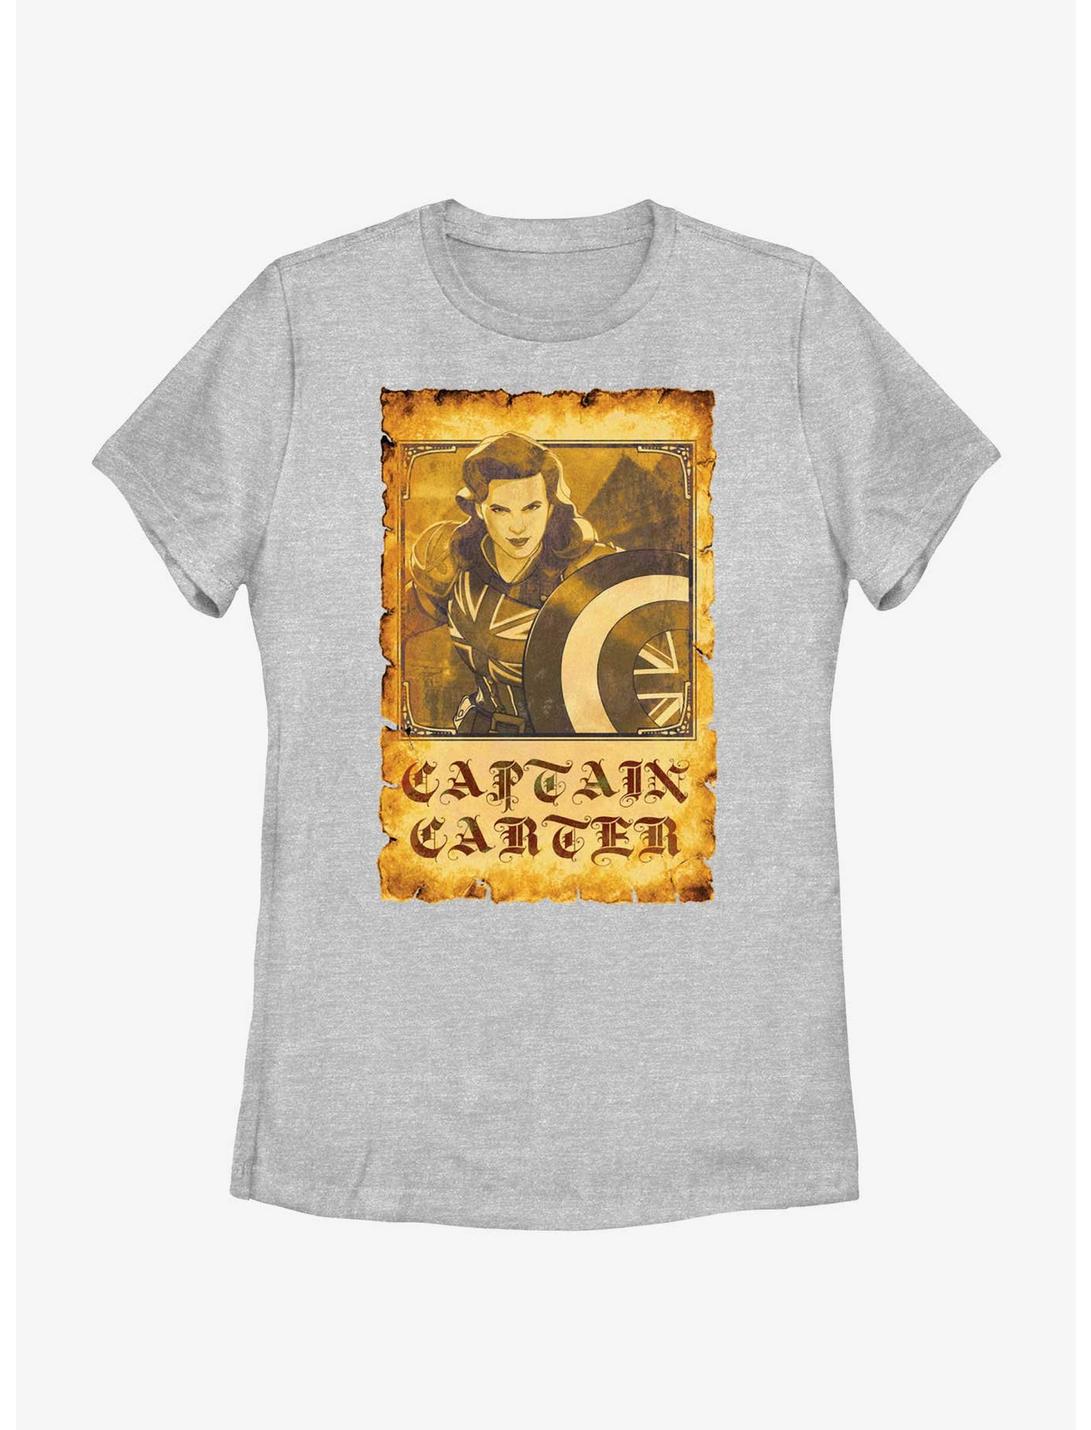 Marvel What If...? Captain Carter Poster Womens T-Shirt, ATH HTR, hi-res